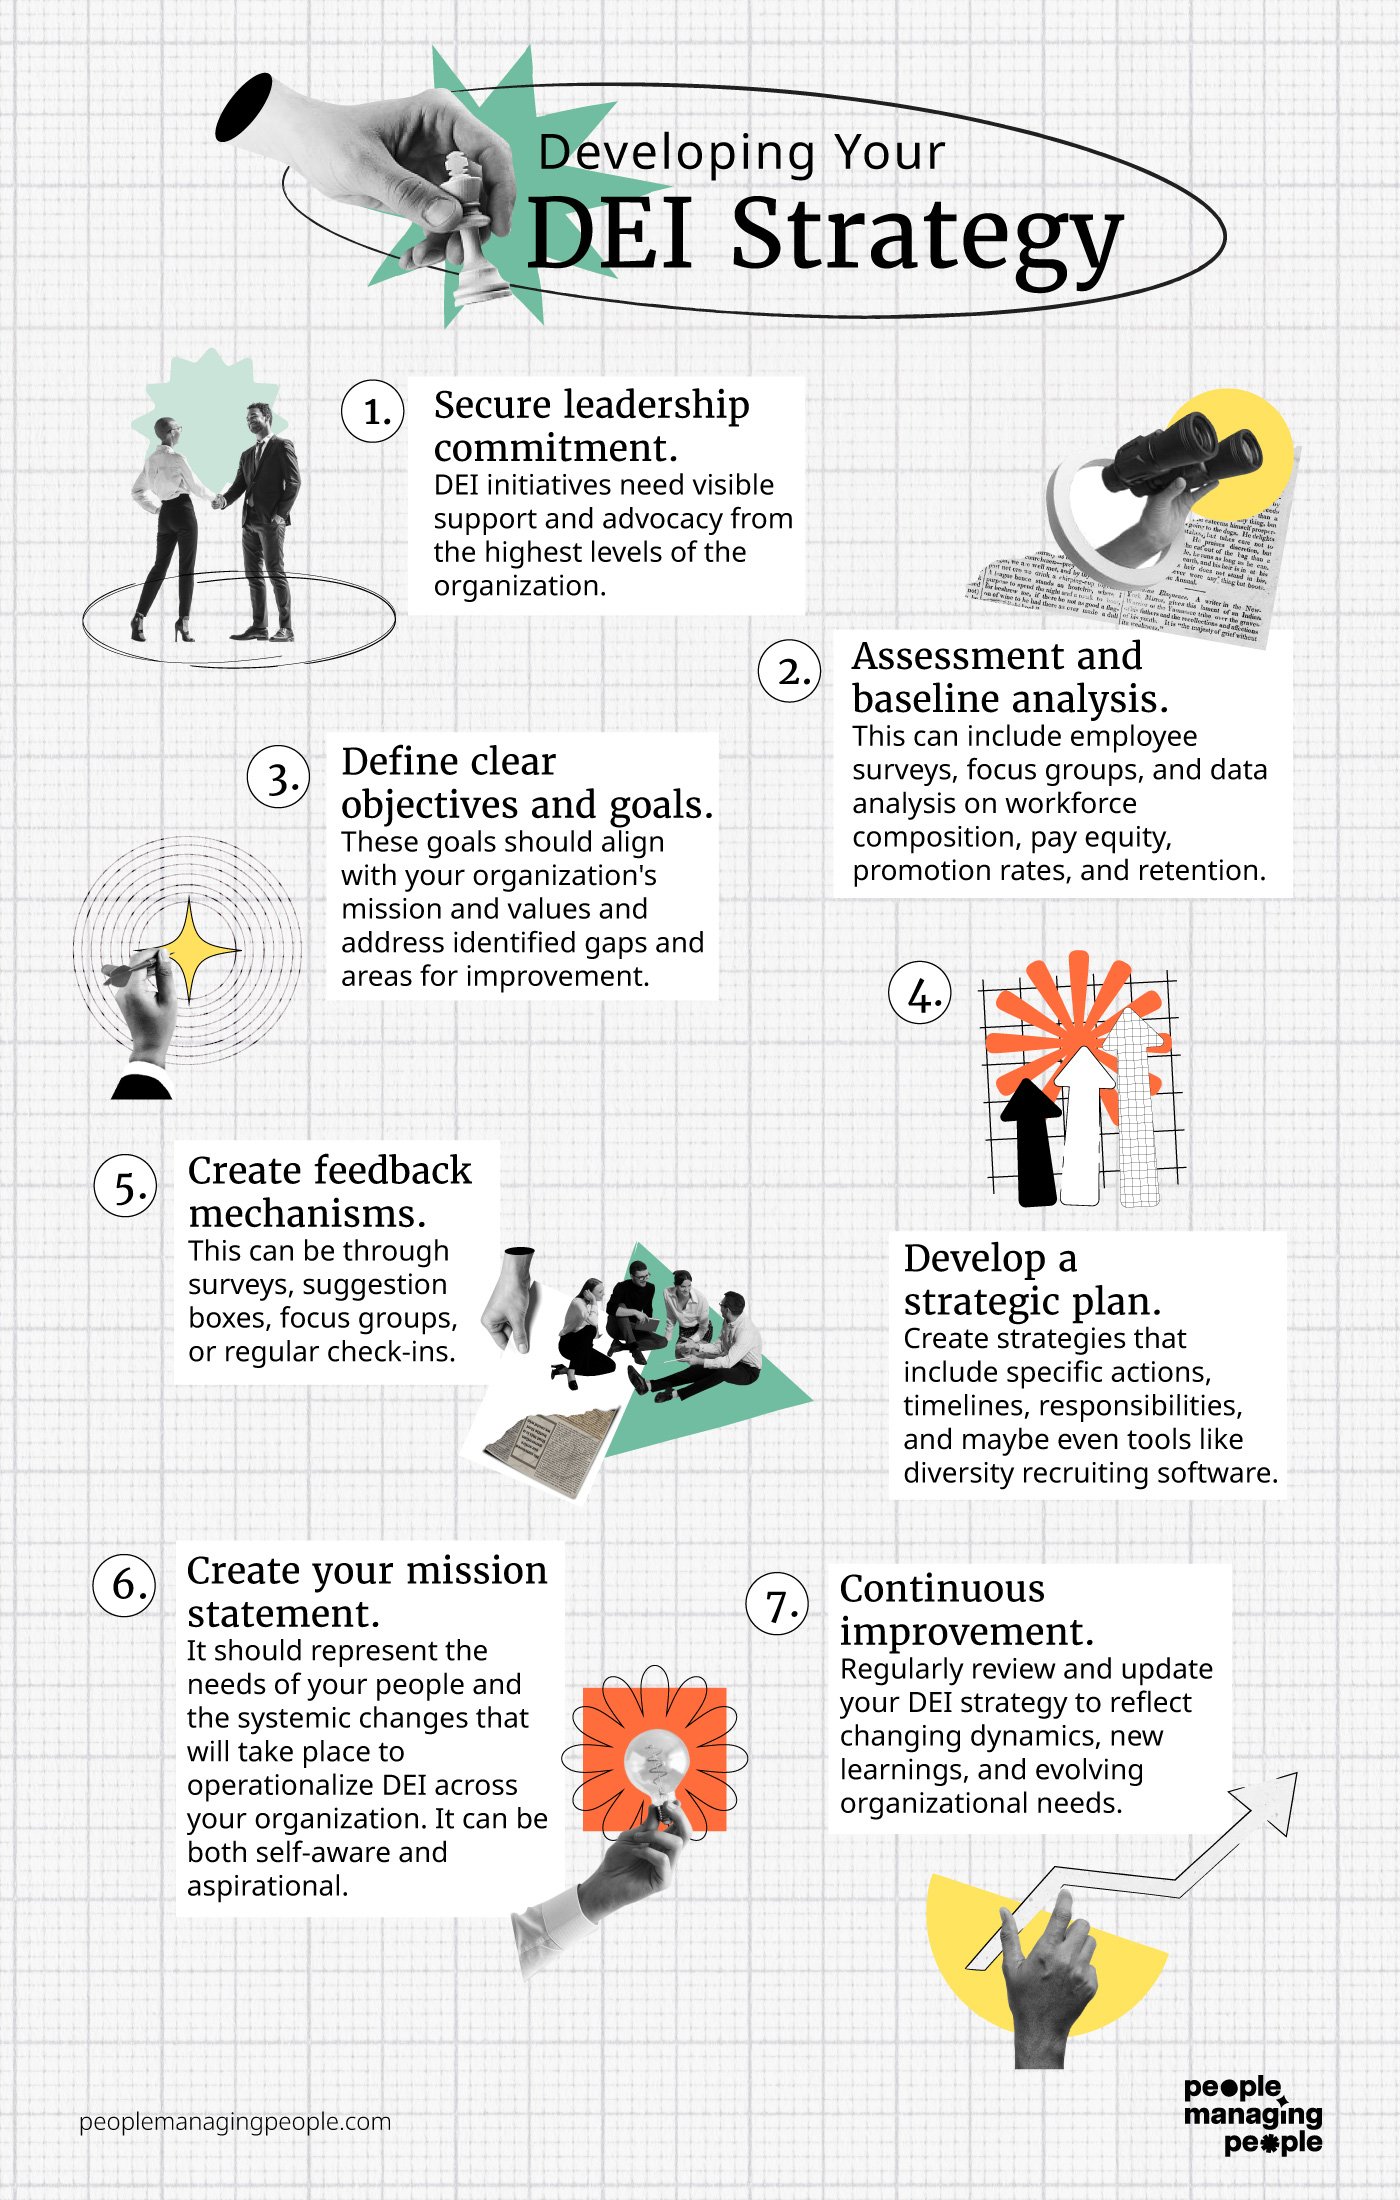 How to develop your DEI strategy infographic.